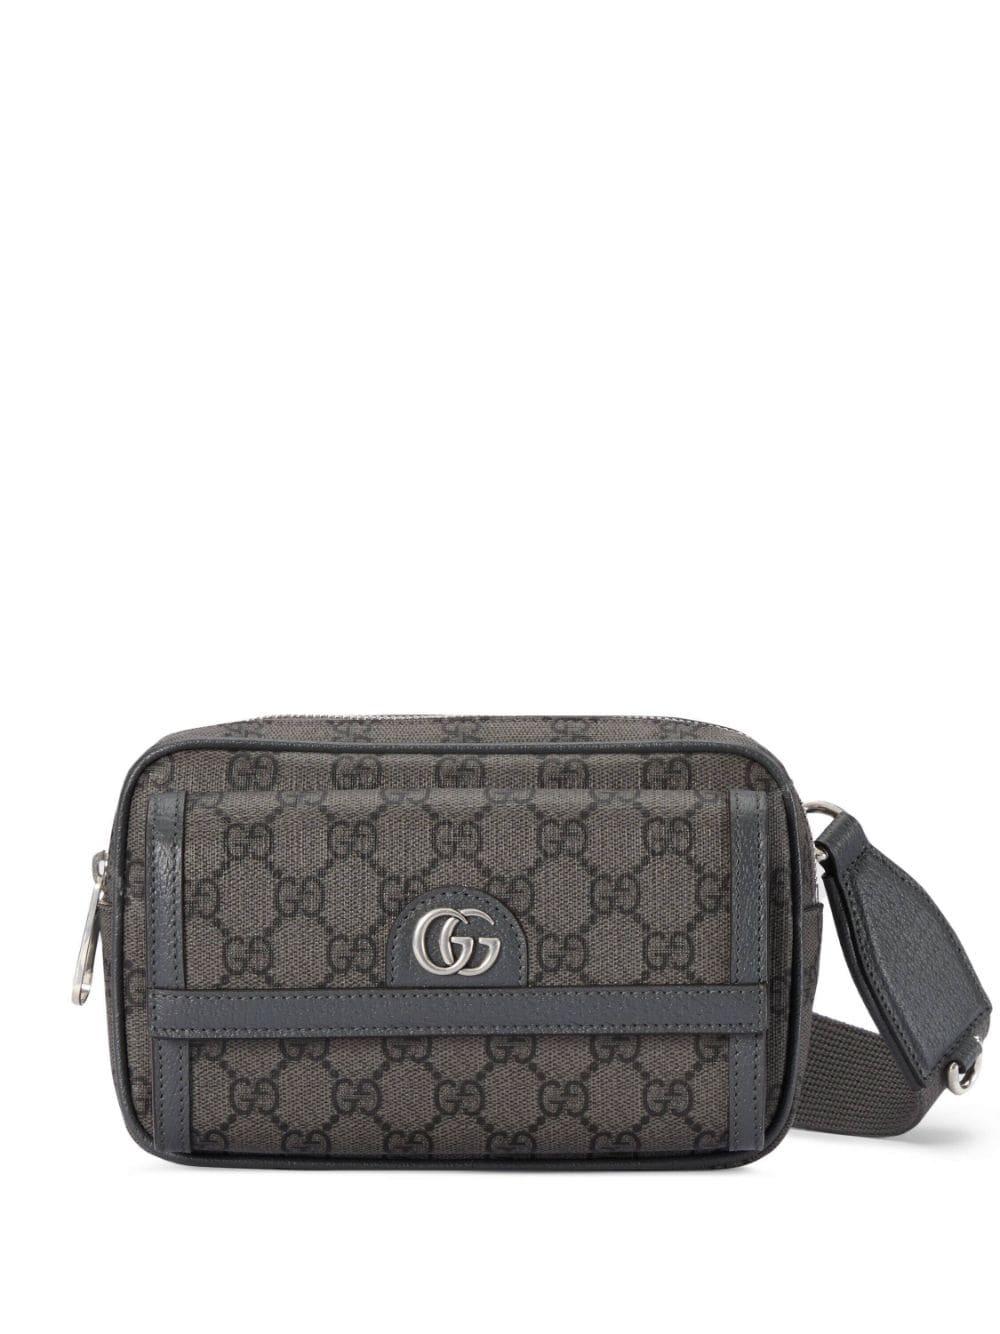 GUCCI Logo GG Pattern Cross Body Messenger Bag Men Canvas Leather From  Japan